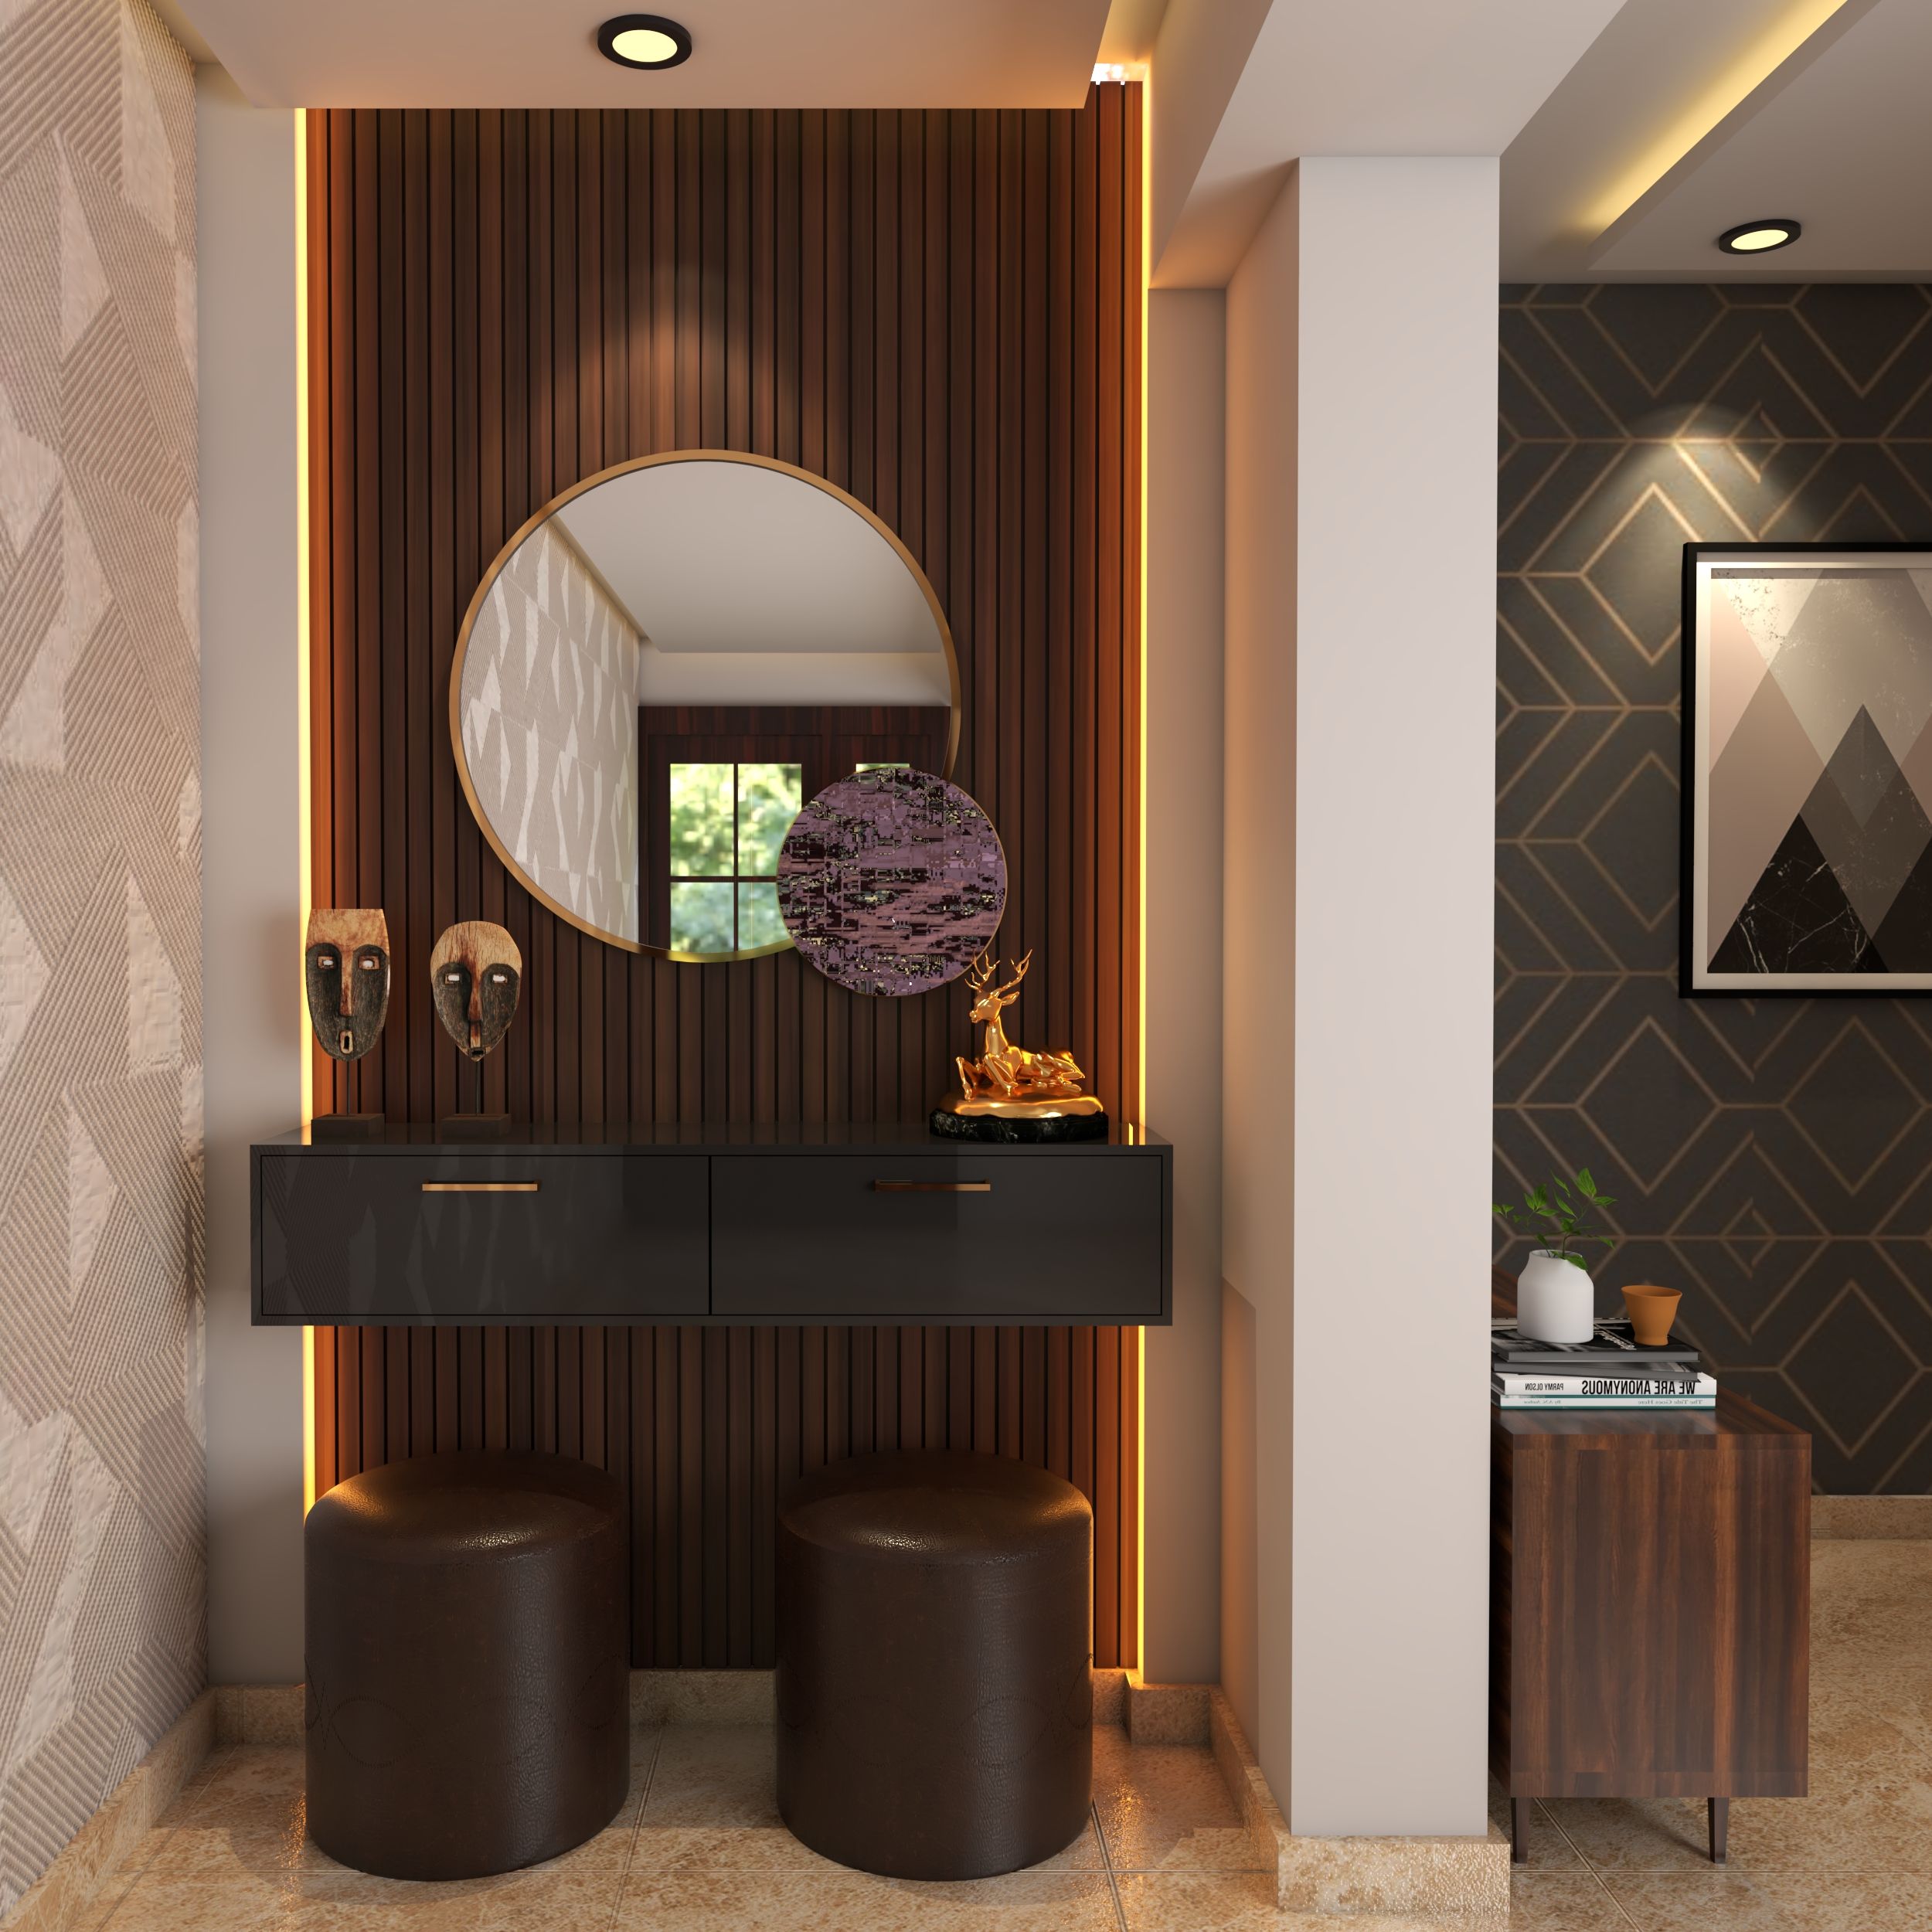 Compact Foyer Design With Circular Mirror And Dark Brown Panels